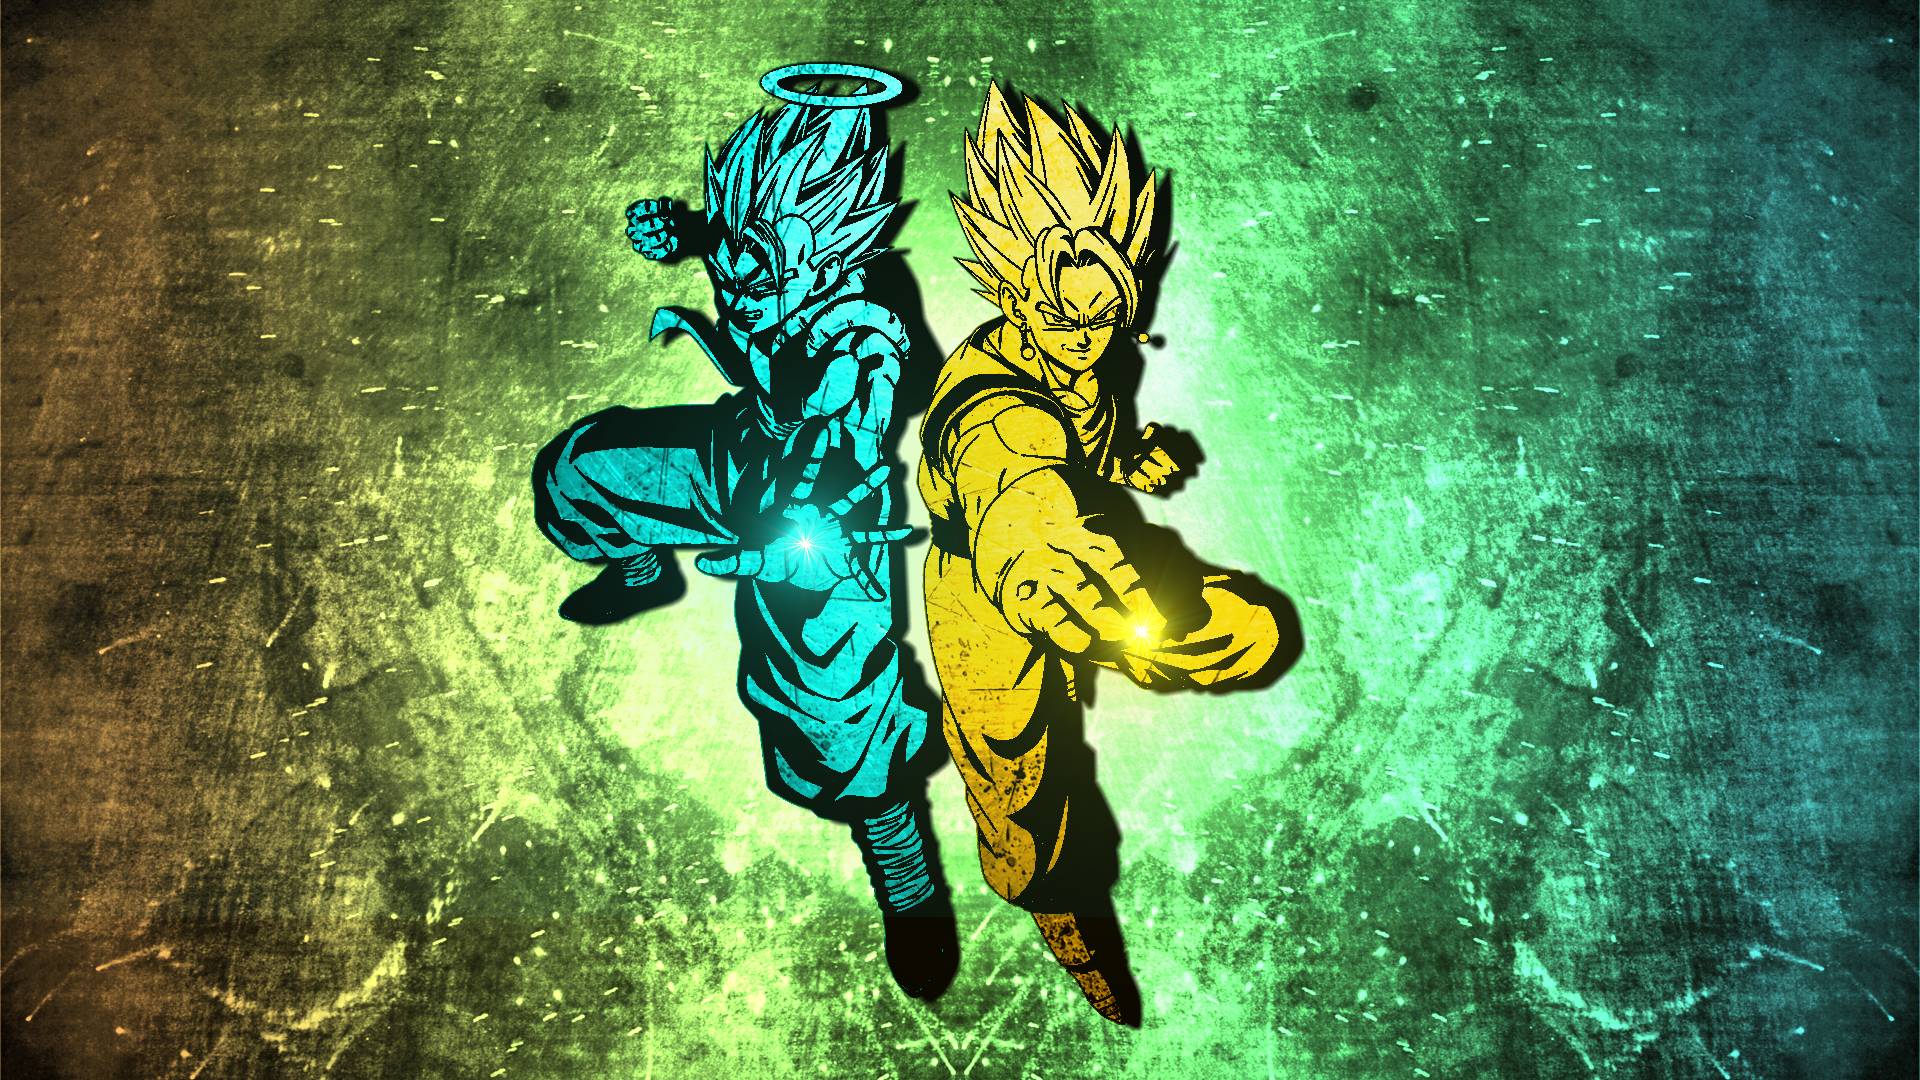 Image For Gogeta And Vegito Wallpapers.